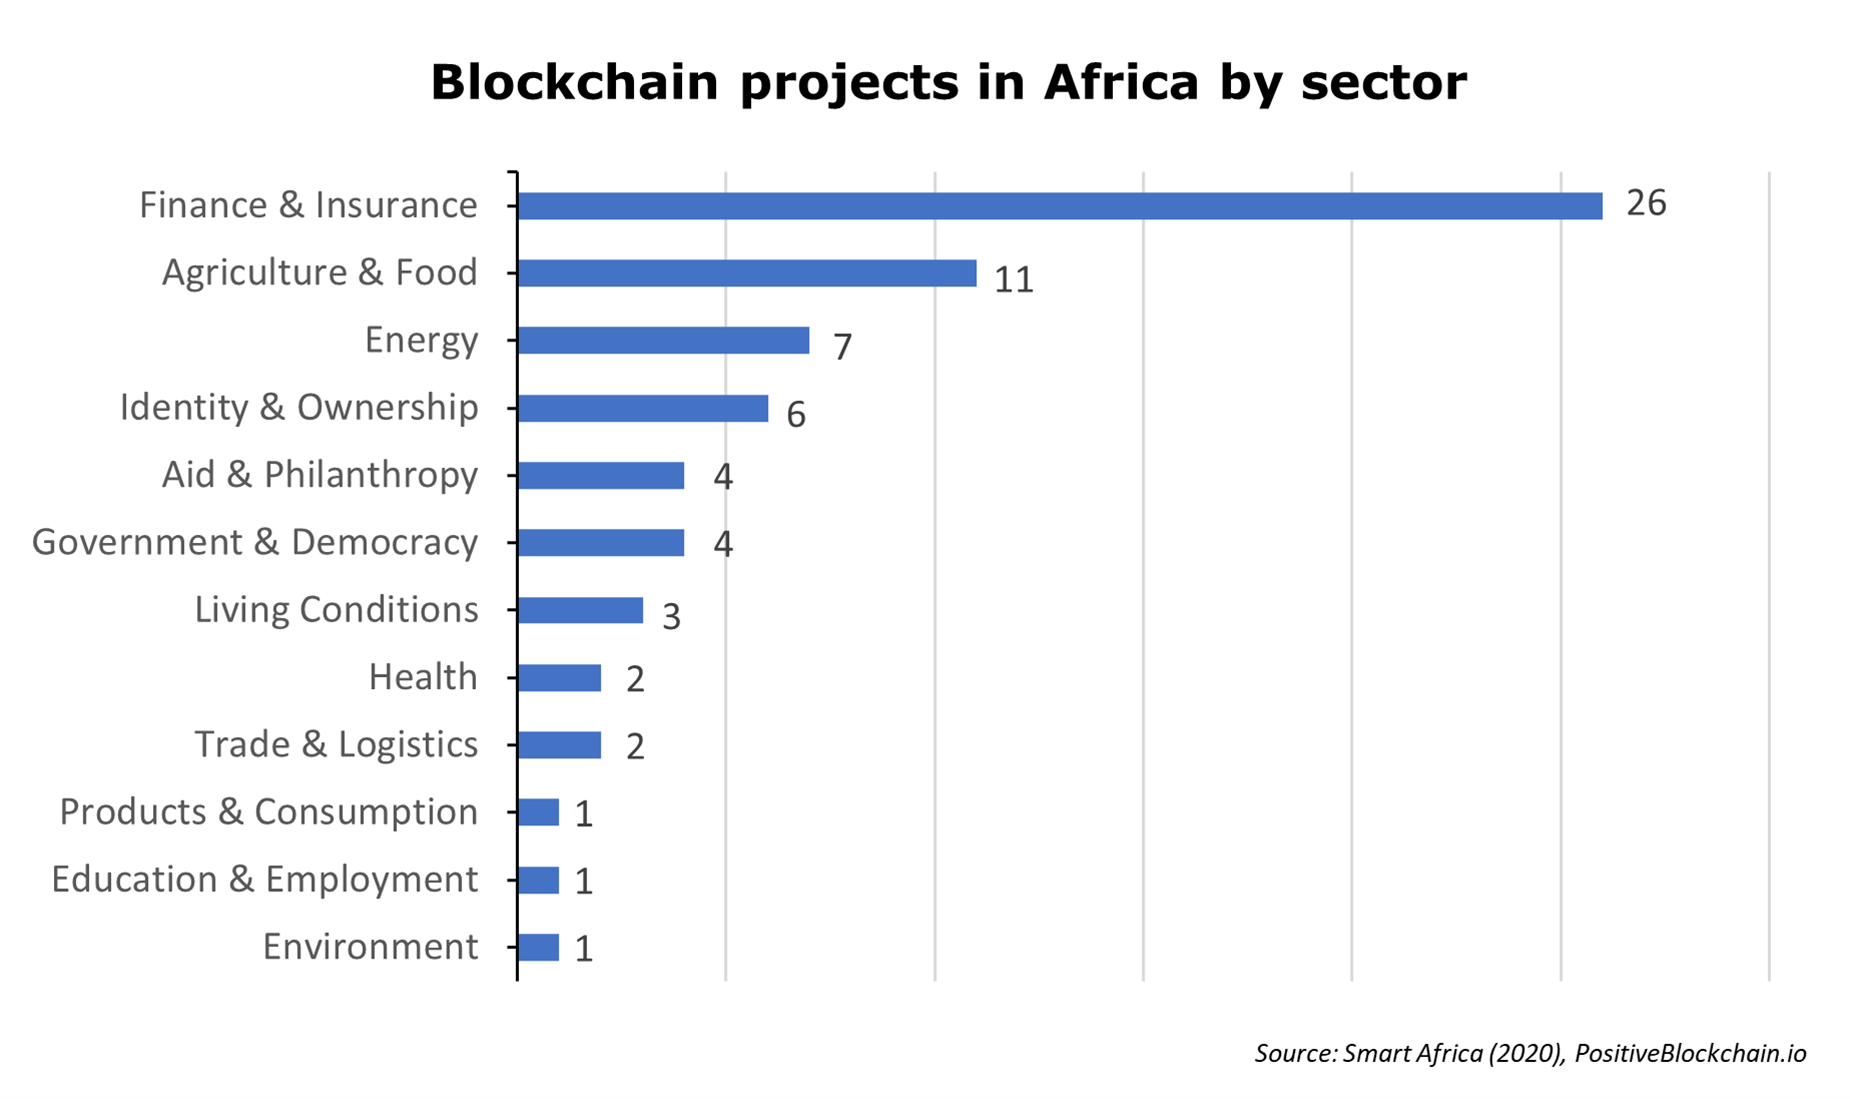 Figure of blockchain projects in Africa by sector